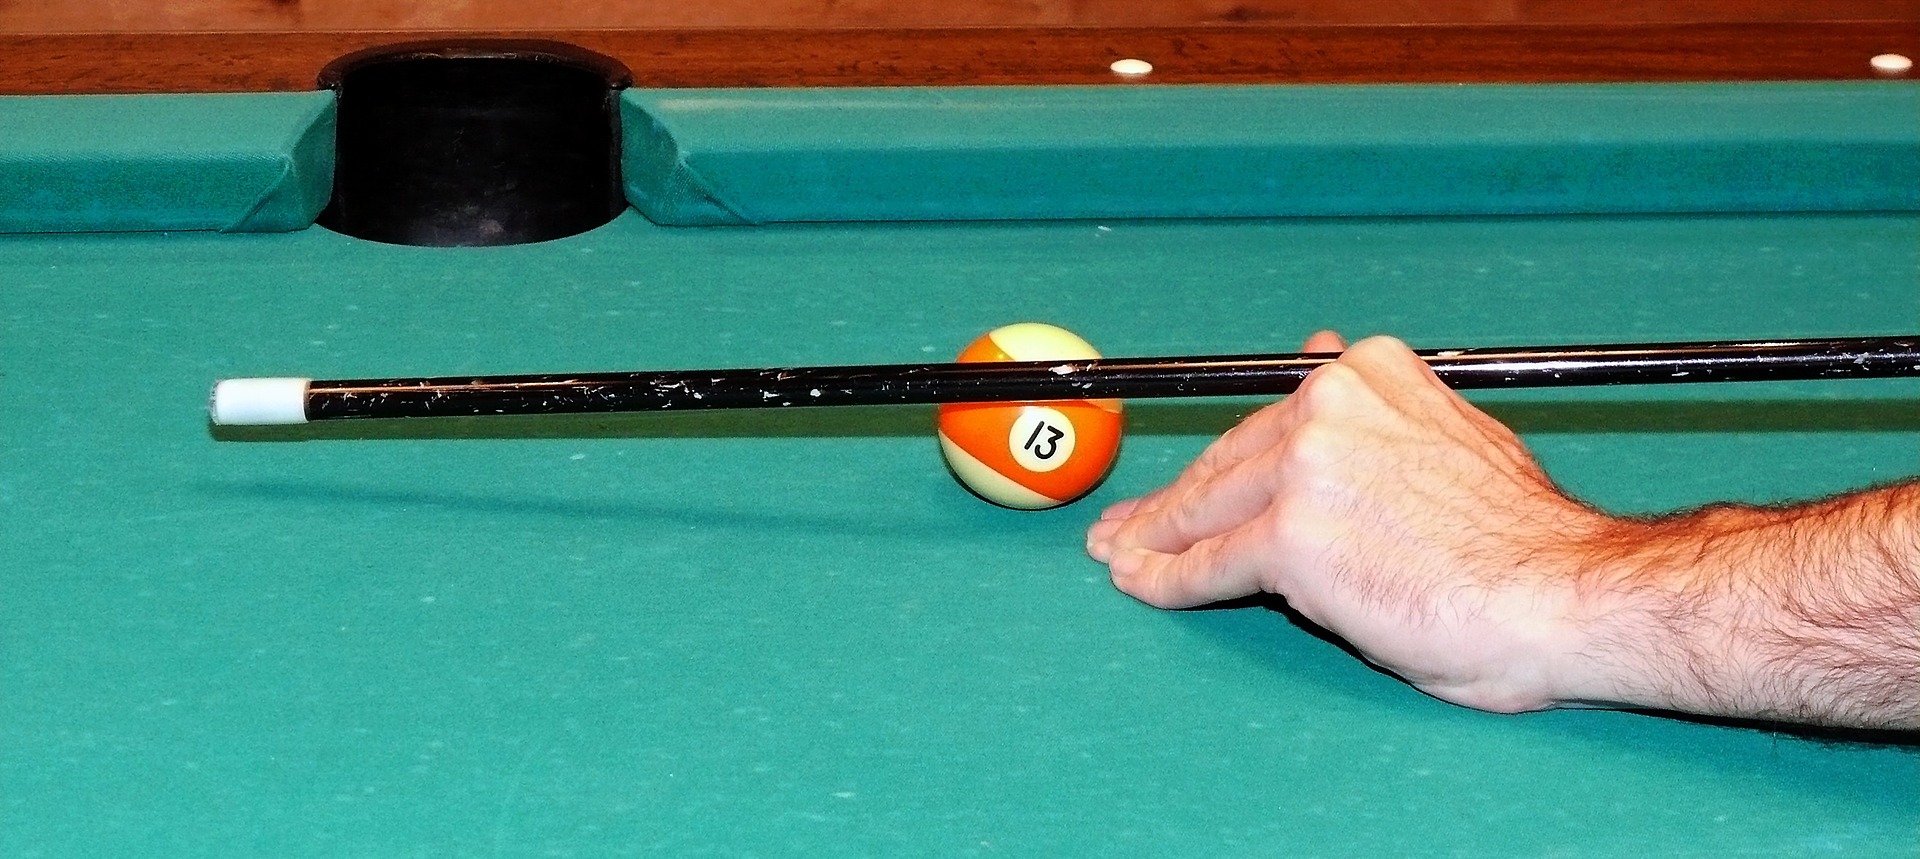 Rating of the best cues for Russian billiards and pool for 2022